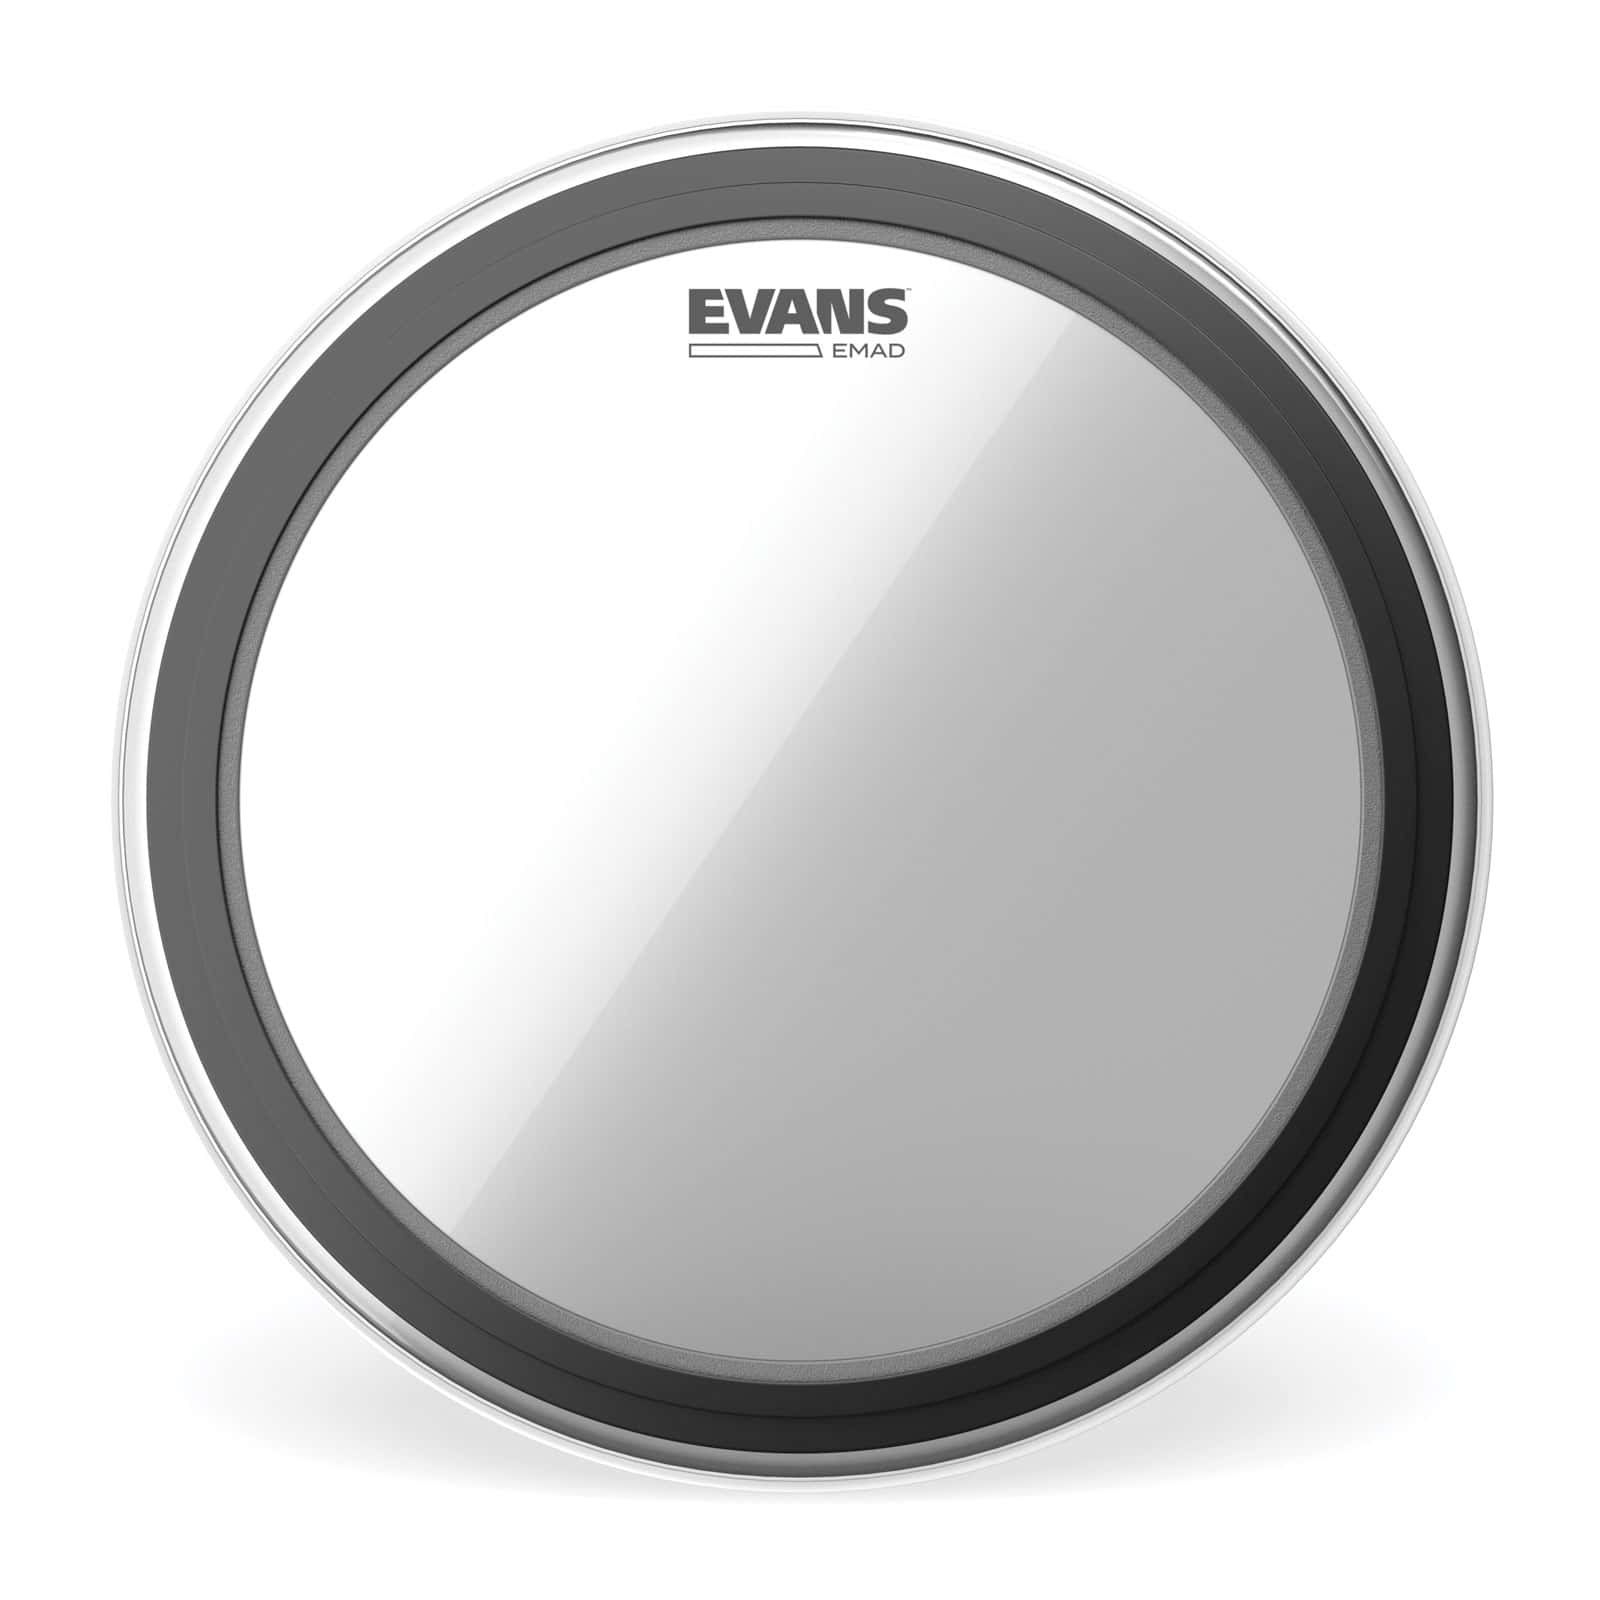 EVANS BD22EMAD - EMAD CLEAR 22